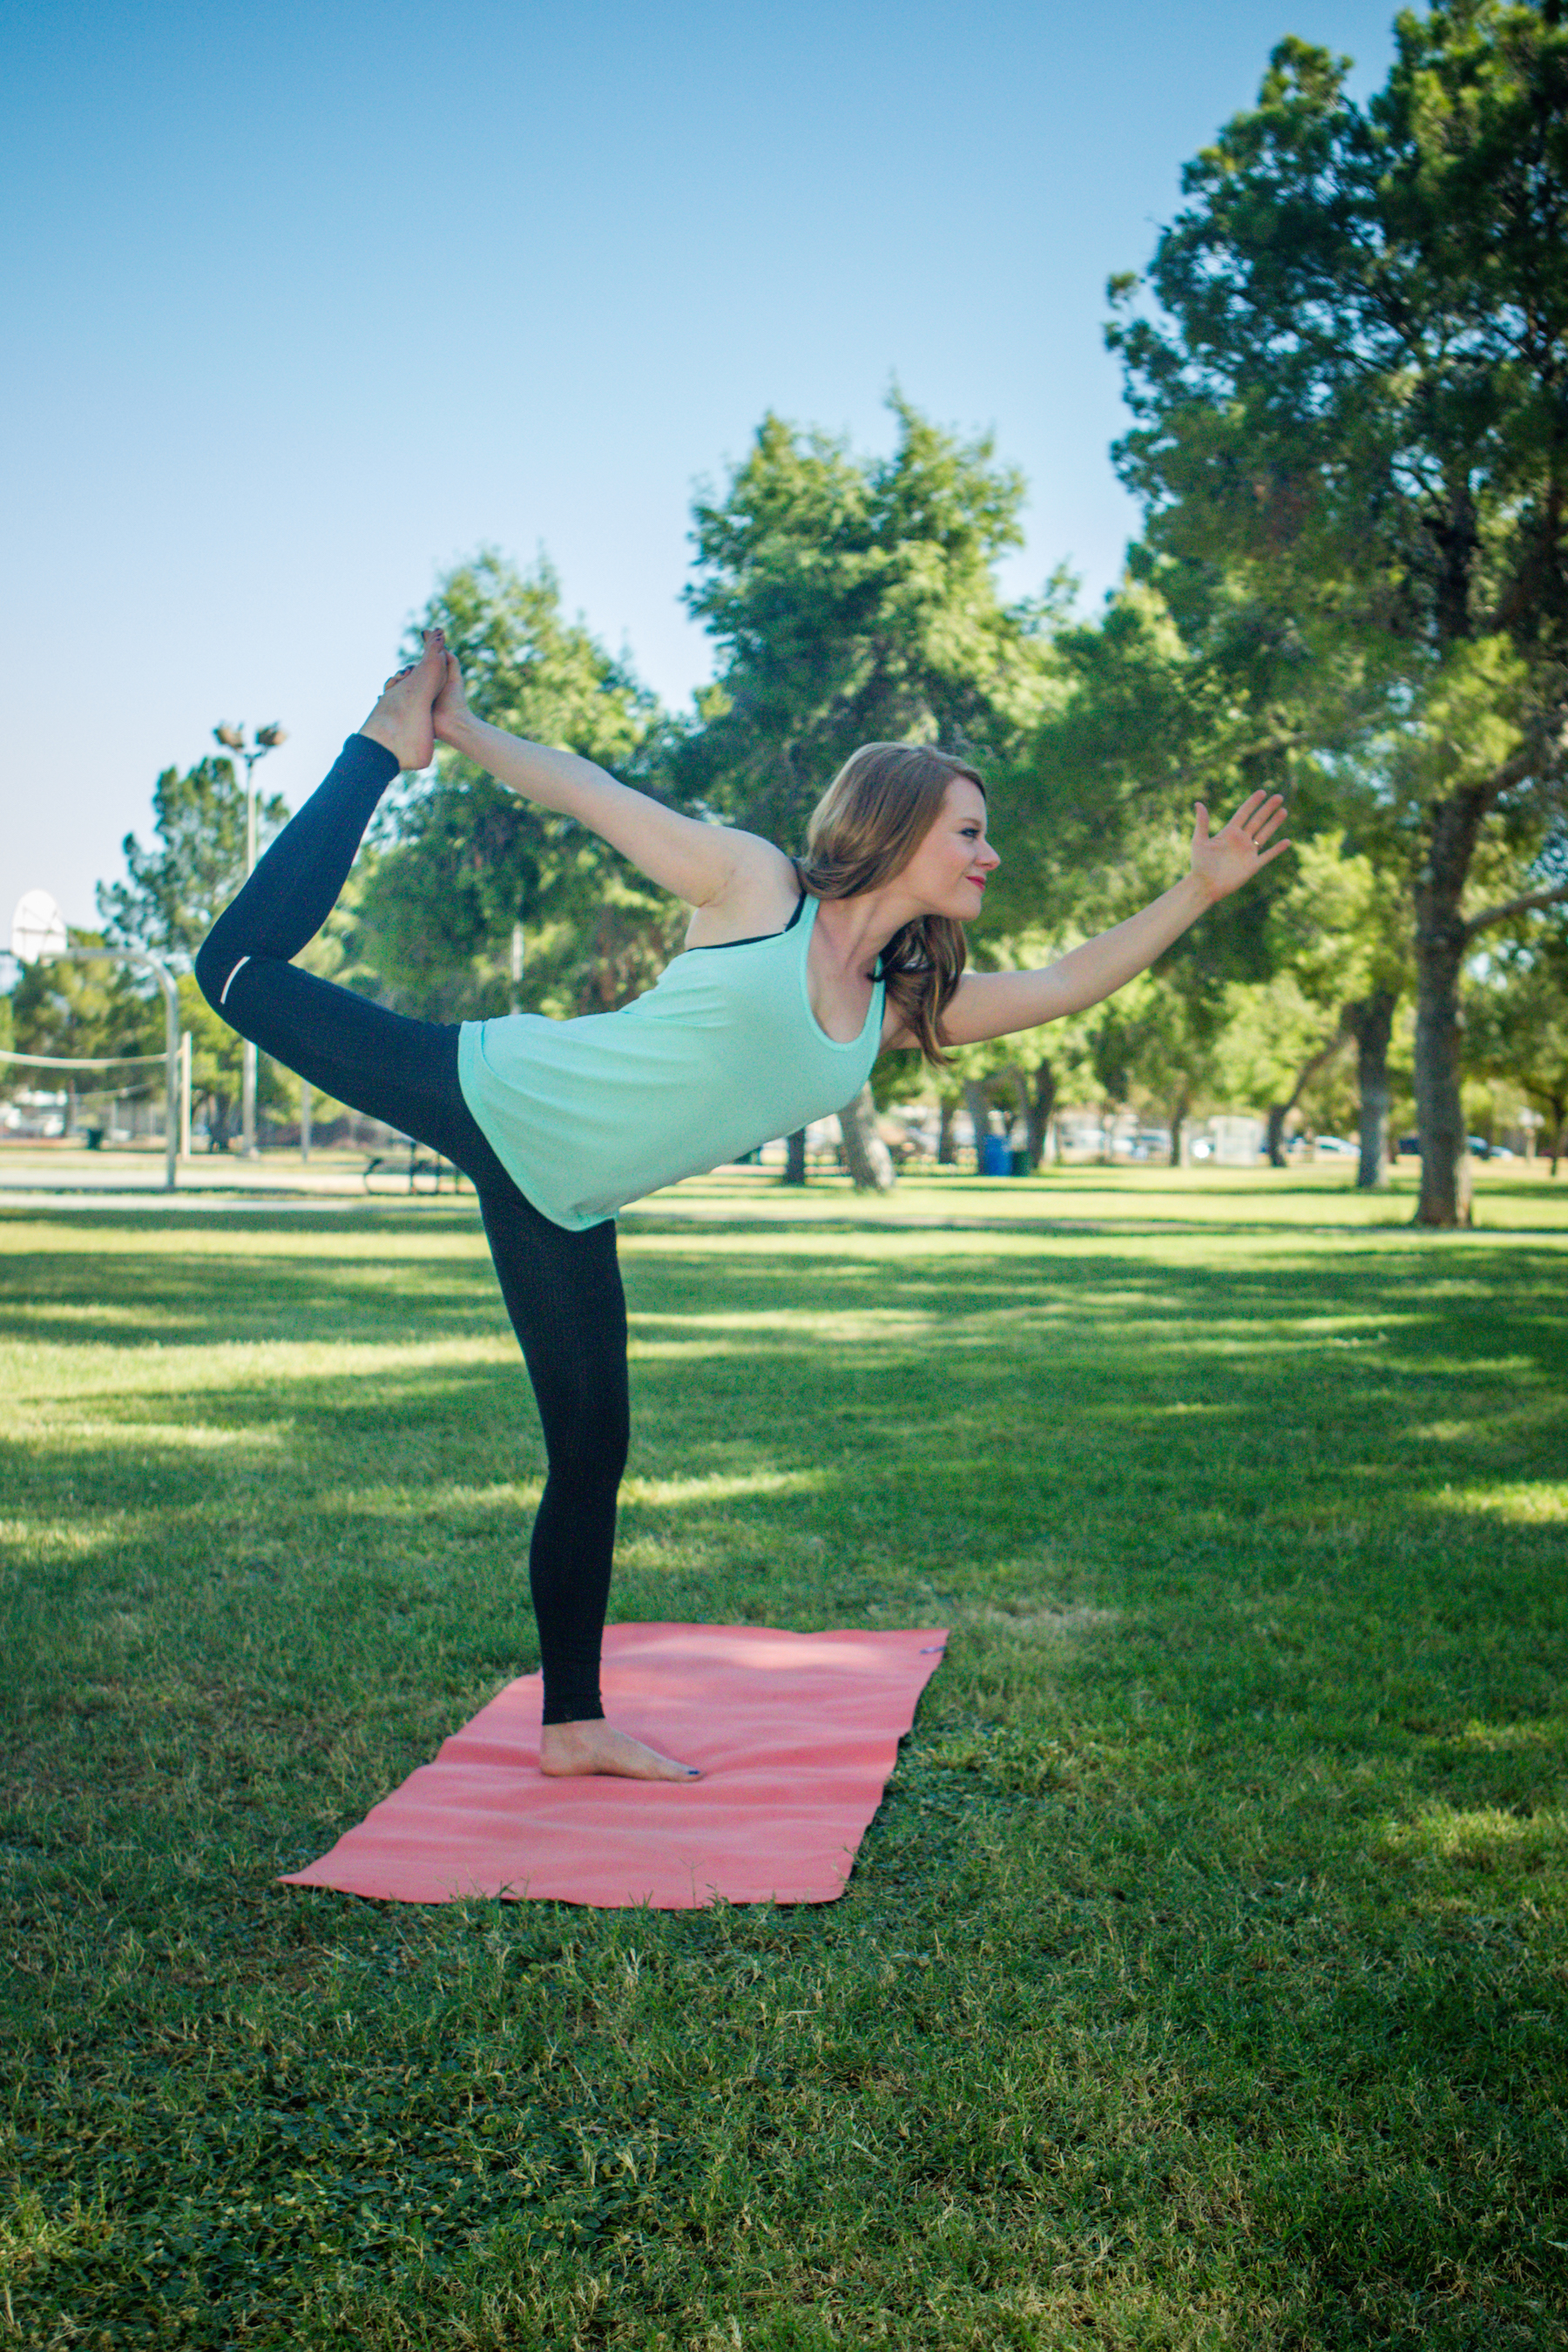 5 Reasons a Yoga Practice is Worth Taking Up